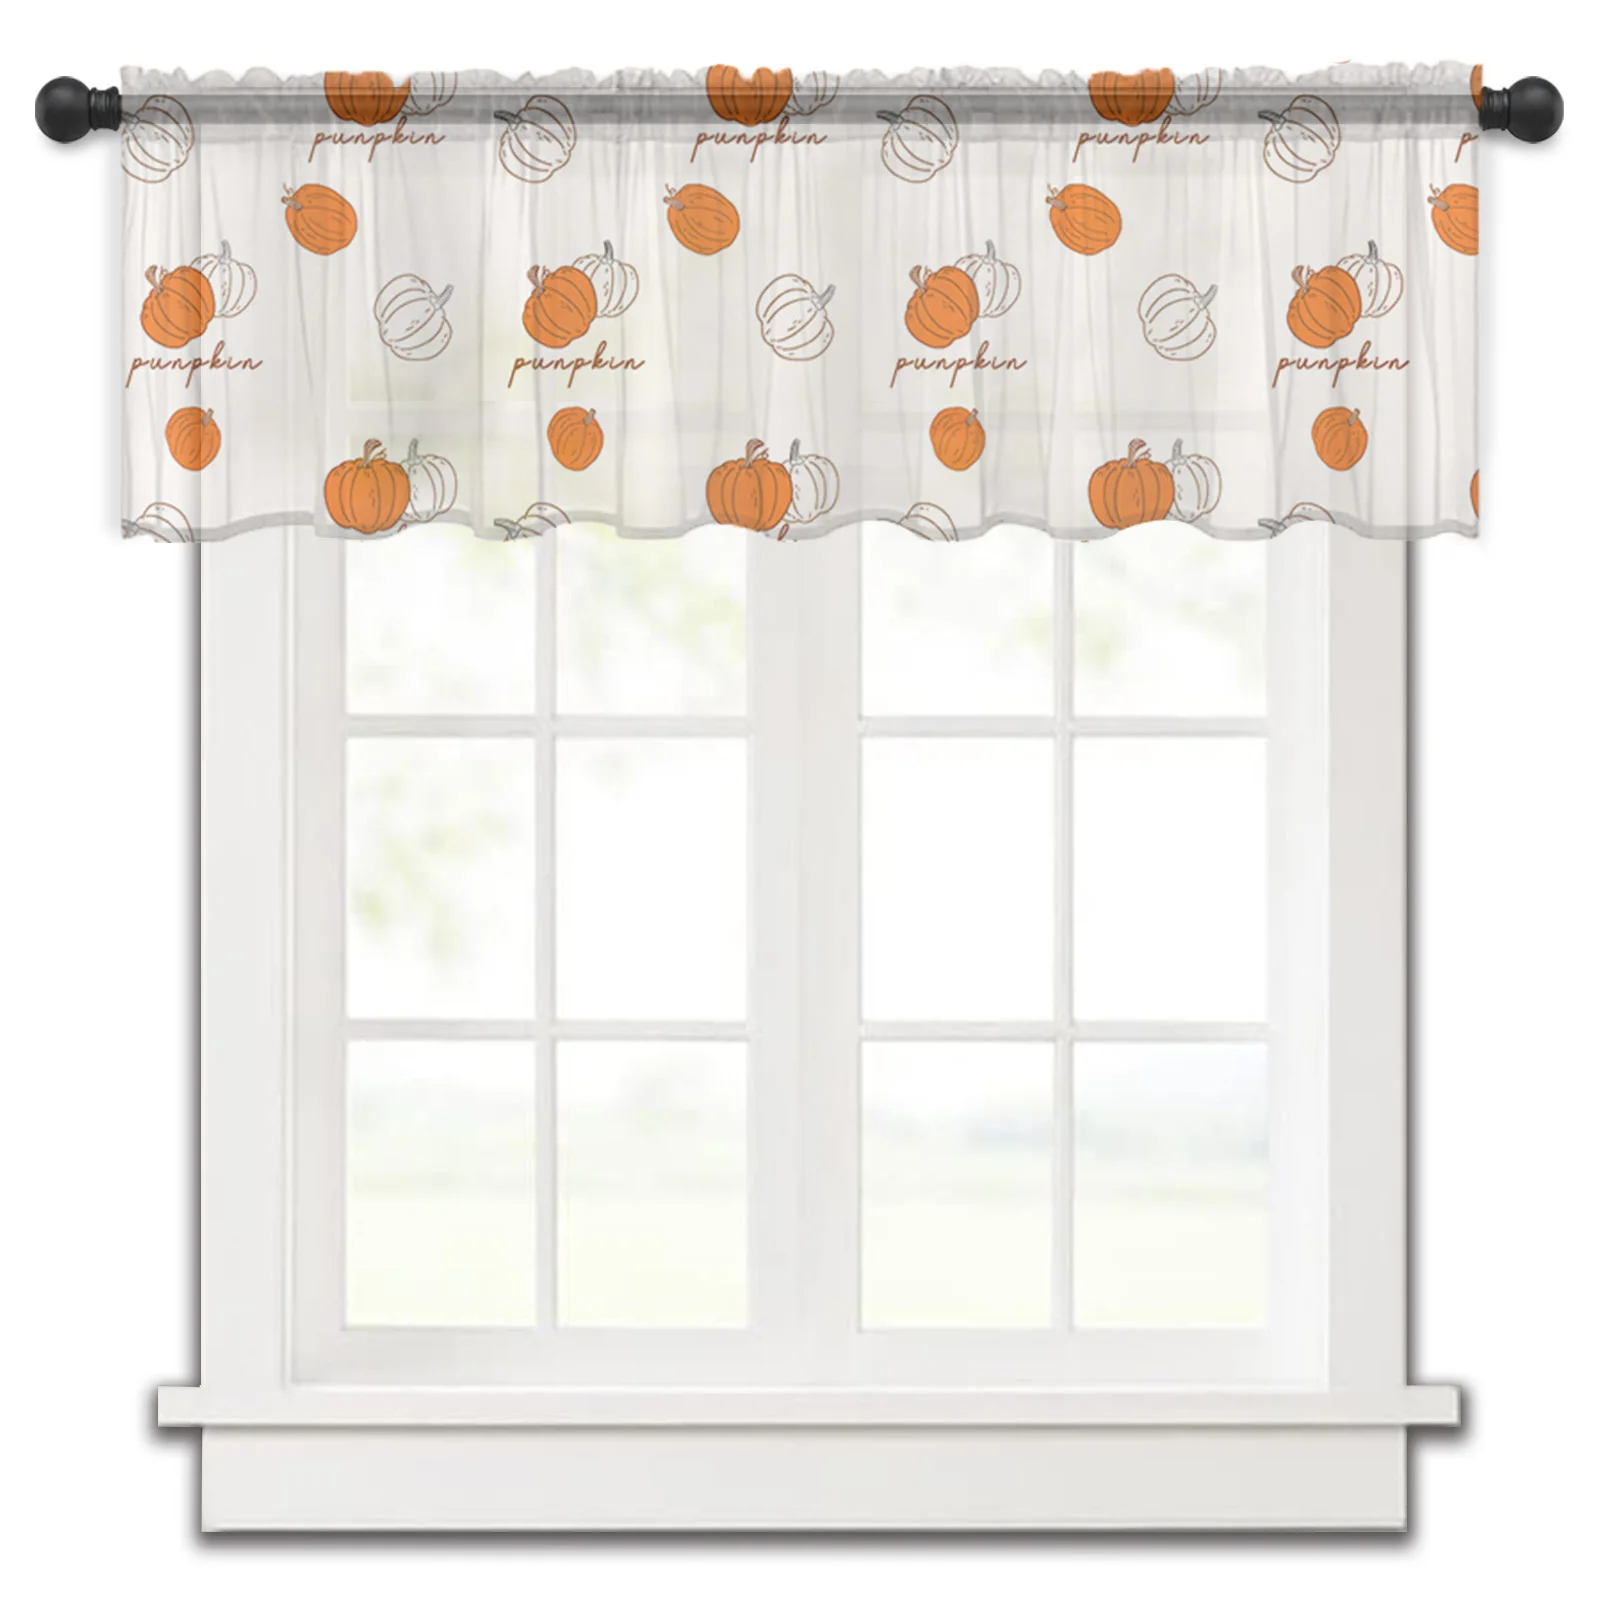 

Autumn Pumpkin Tulle Kitchen Small Window Curtain Valance Sheer Short Curtain Bedroom Living Room Home Decor Voile Drapes